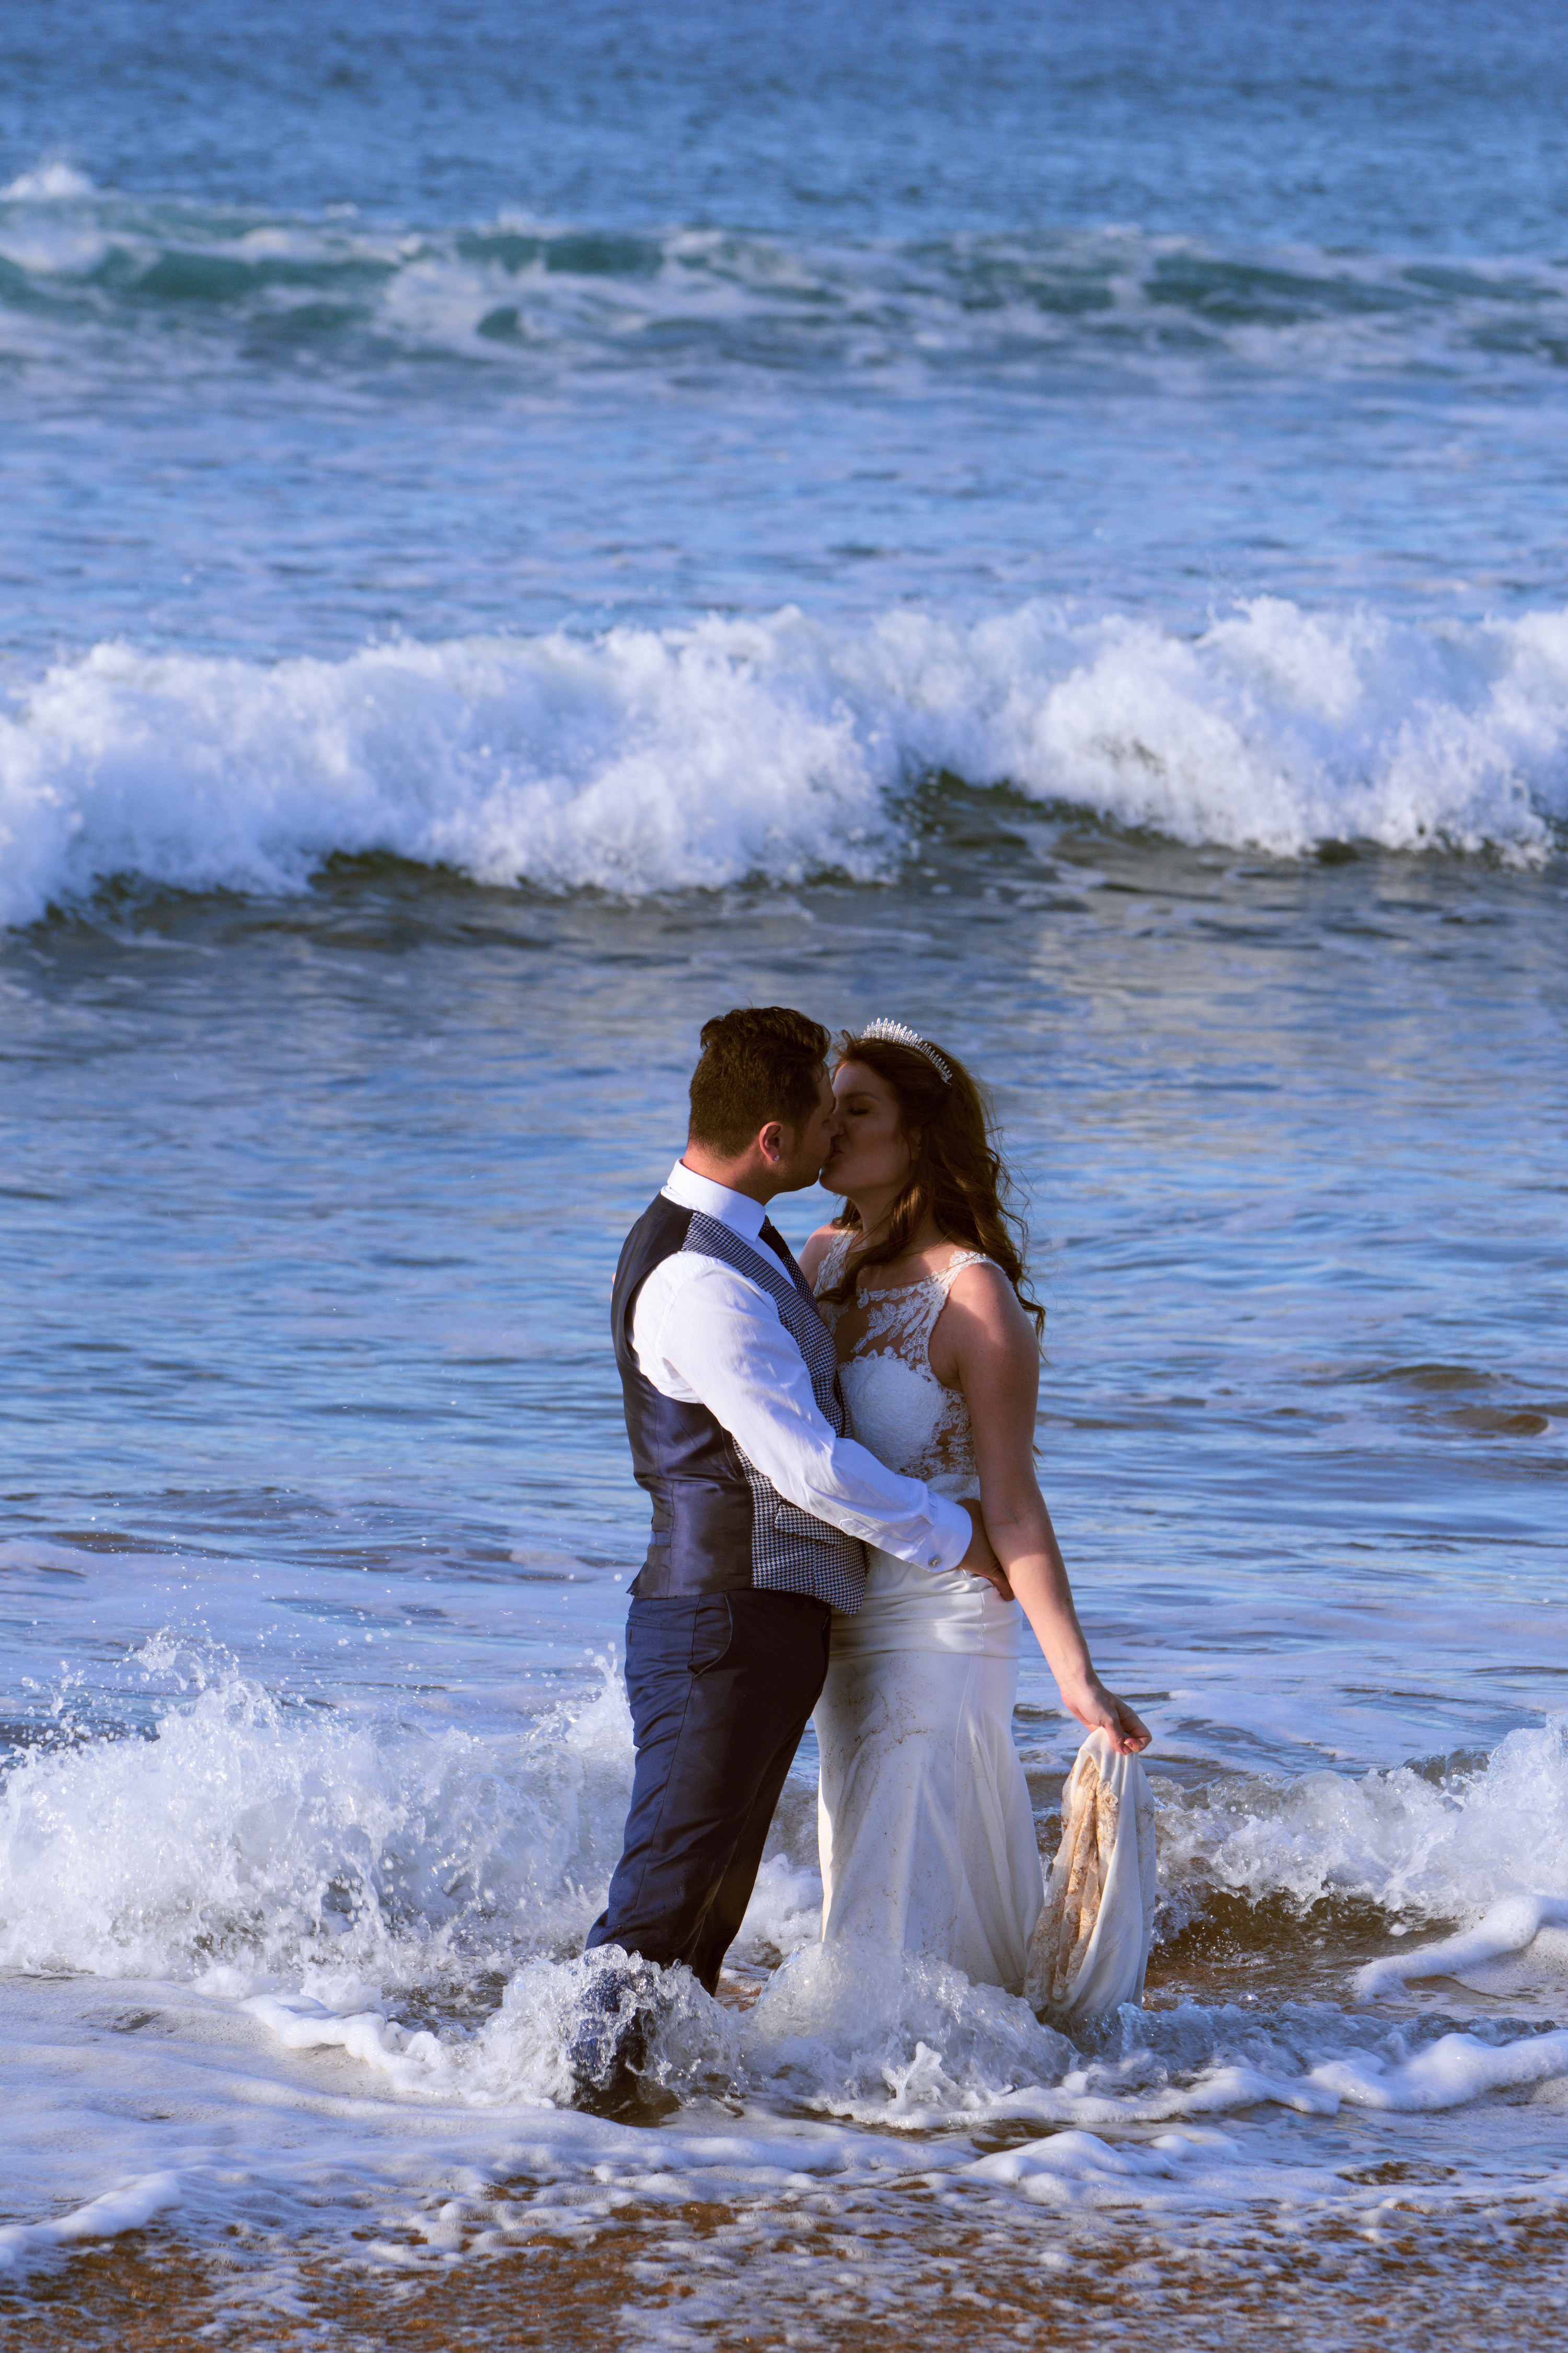 A groom and bride kissing in the water at the beach